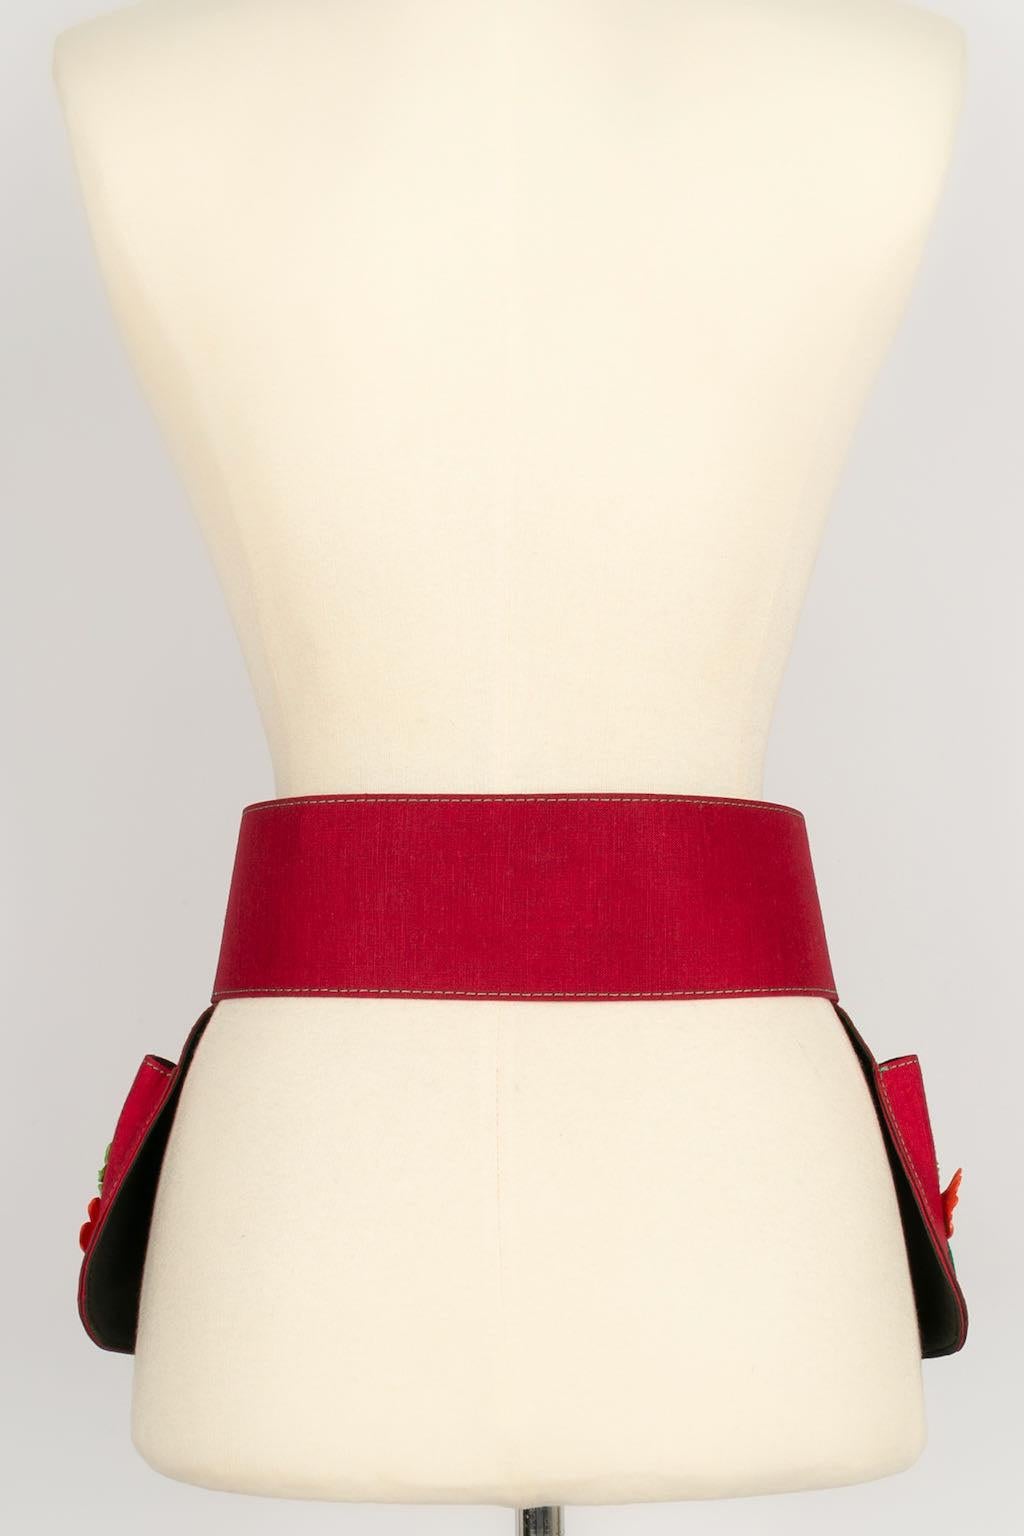 Women's Chantal Thomass Black Leather and Red Cotton Belt, 1993 Fashion Show For Sale